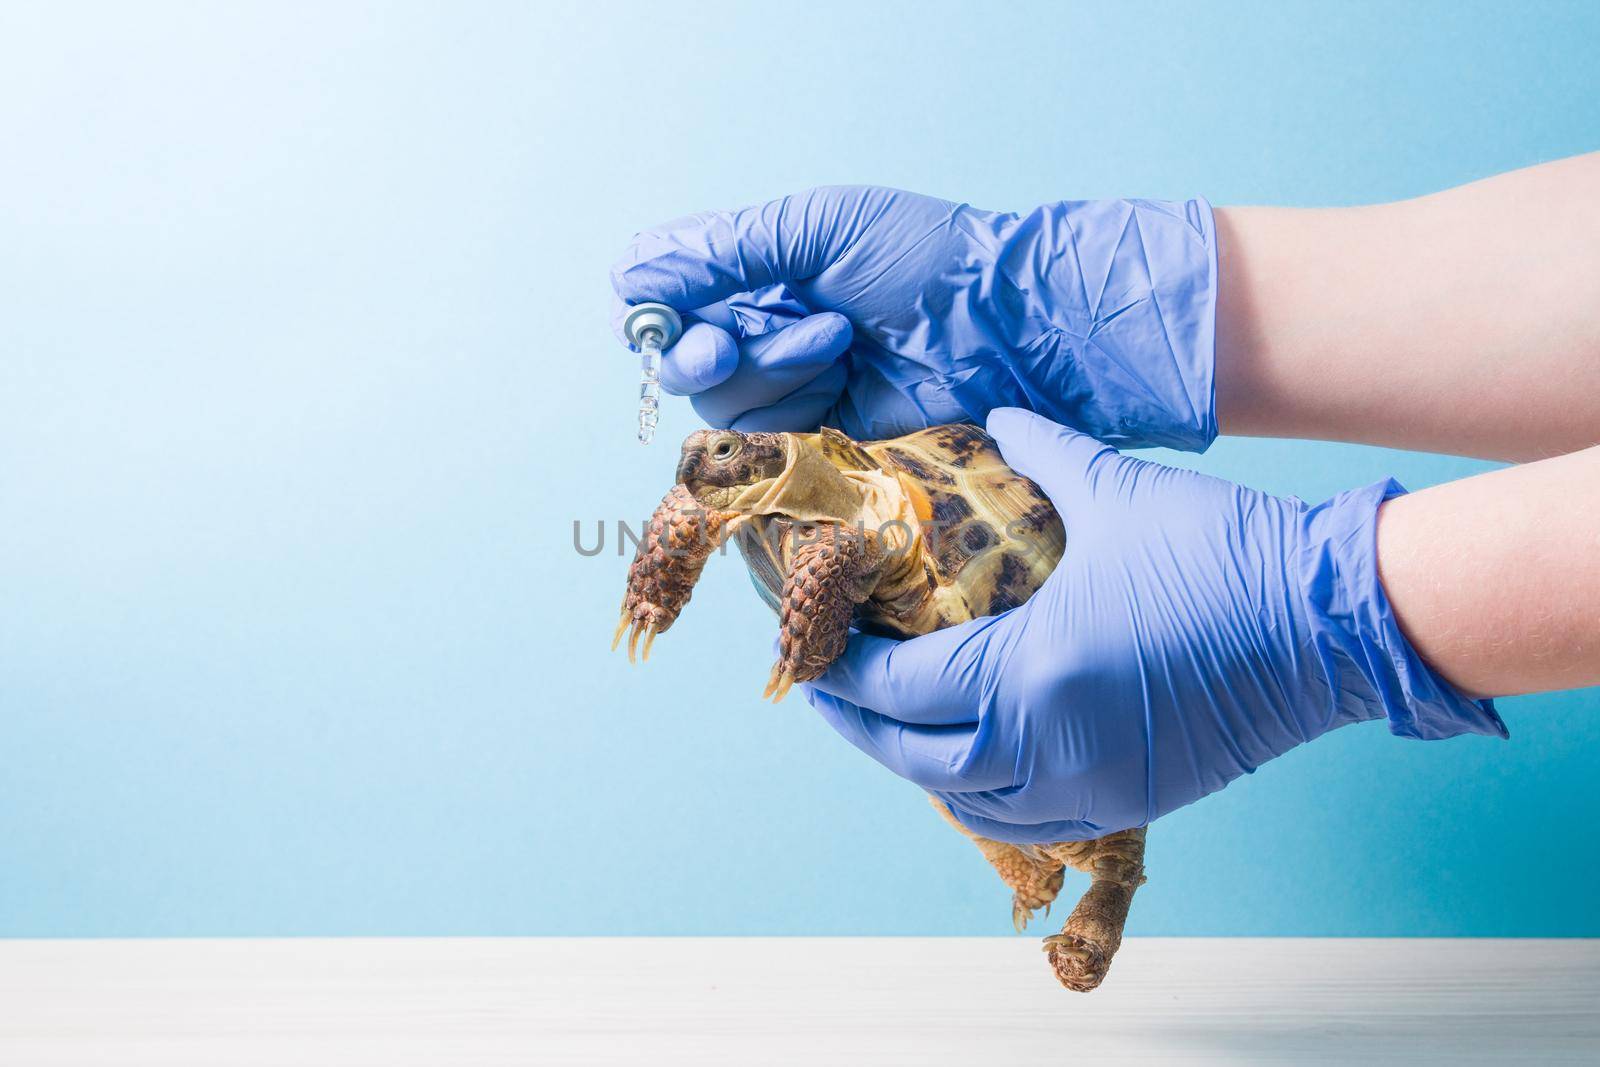 Herpetologist's veterinarian gives a drop of medicine from a pipette to a land tortoise, a hand in a rubber glove with a pipette for a drop to treat turtles, blue background, copy space